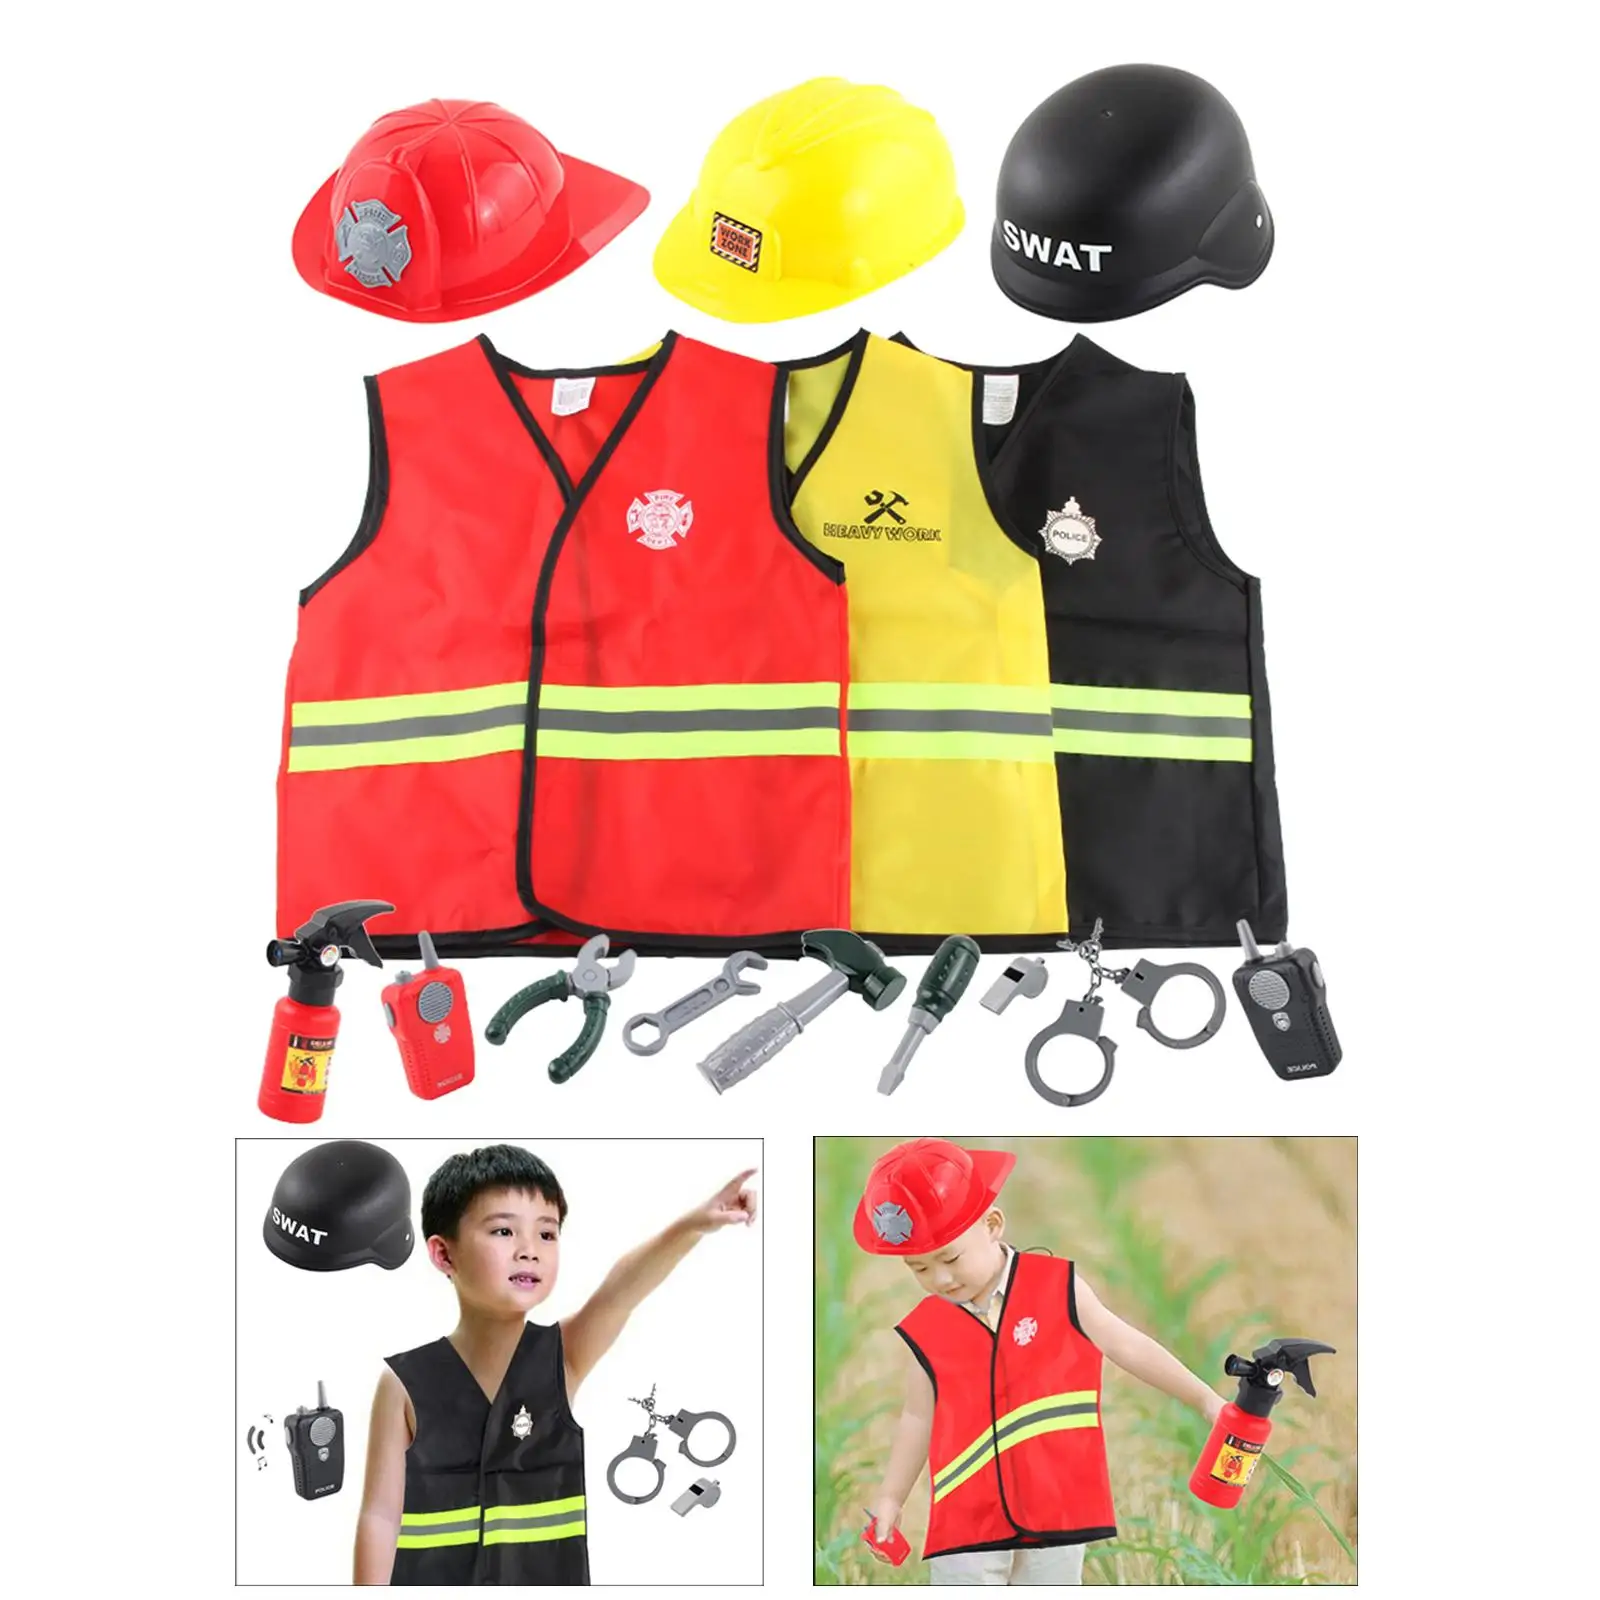 Fireman Costume Firefighter Dress up for Christmas Party Stage Performances Girls Boys